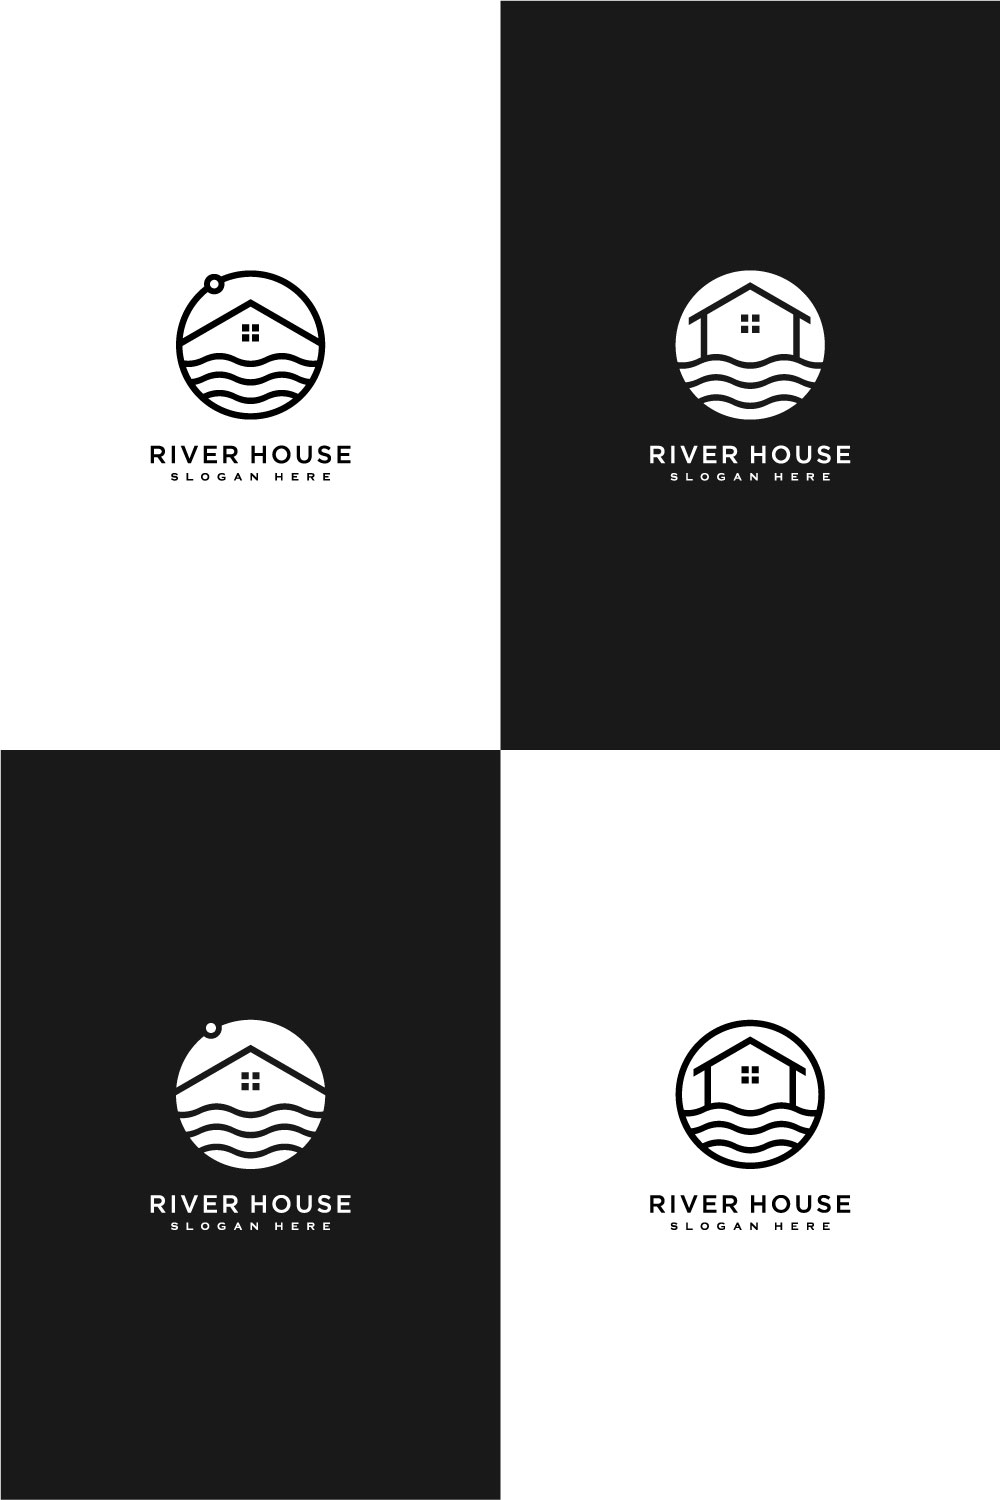 Set Of Minimalist Line Abstract House With River Logo Design Pinterest Image.